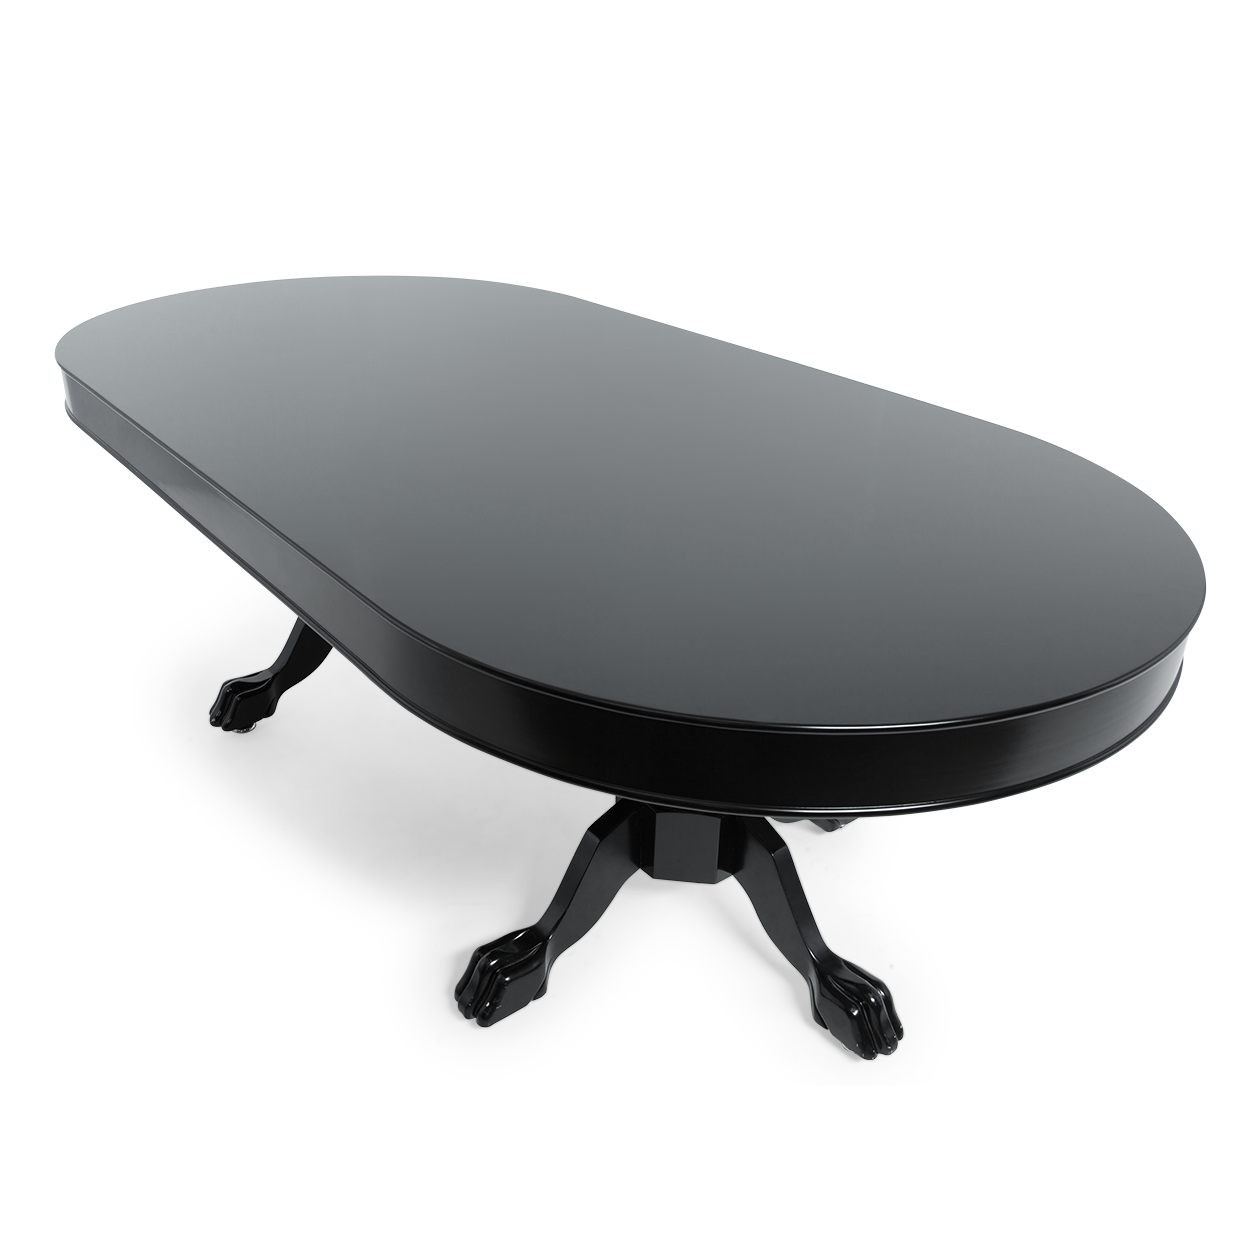 Oval dining top on Elite game table in a black finish.